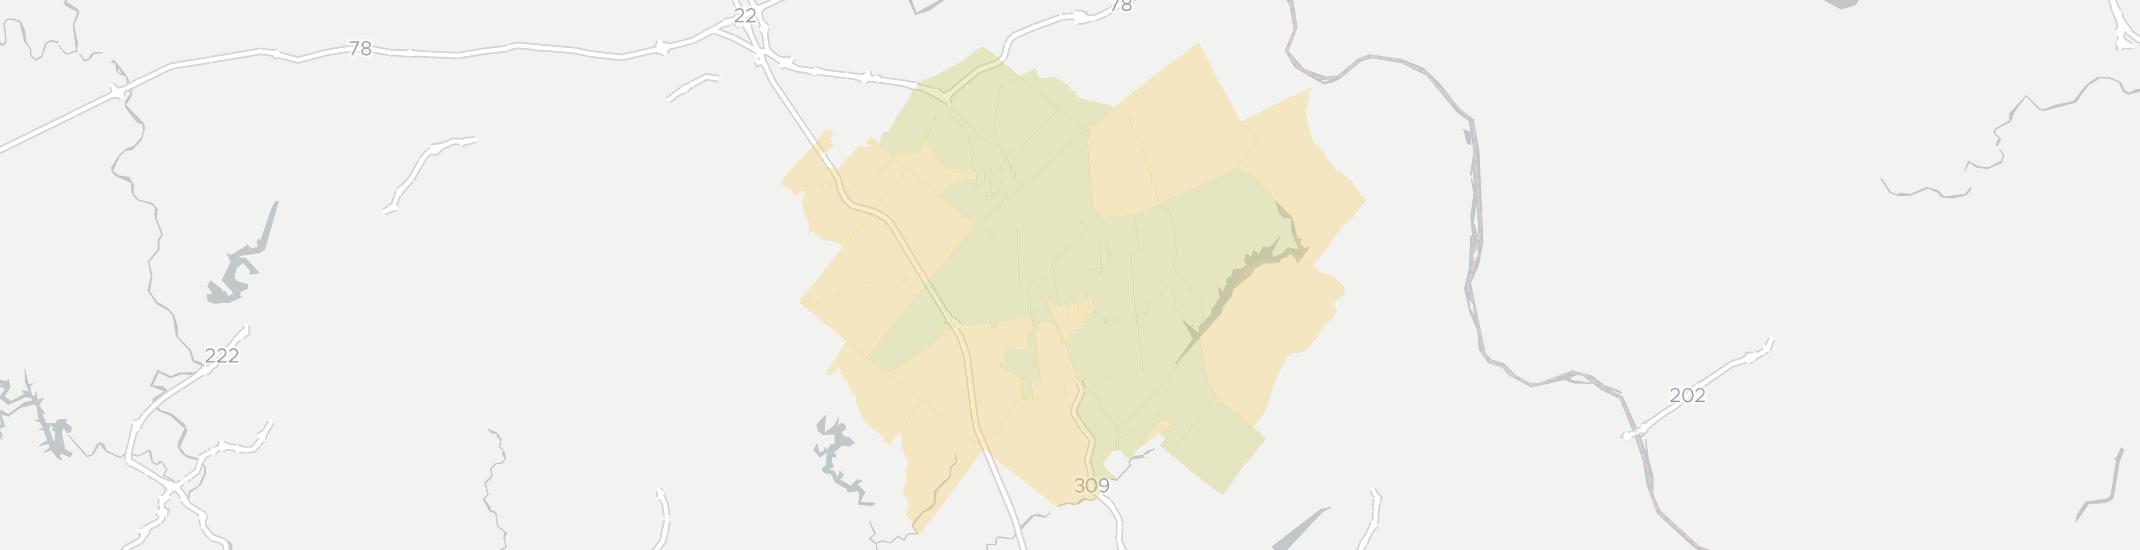 Quakertown Internet Competition Map. Click for interactive map.